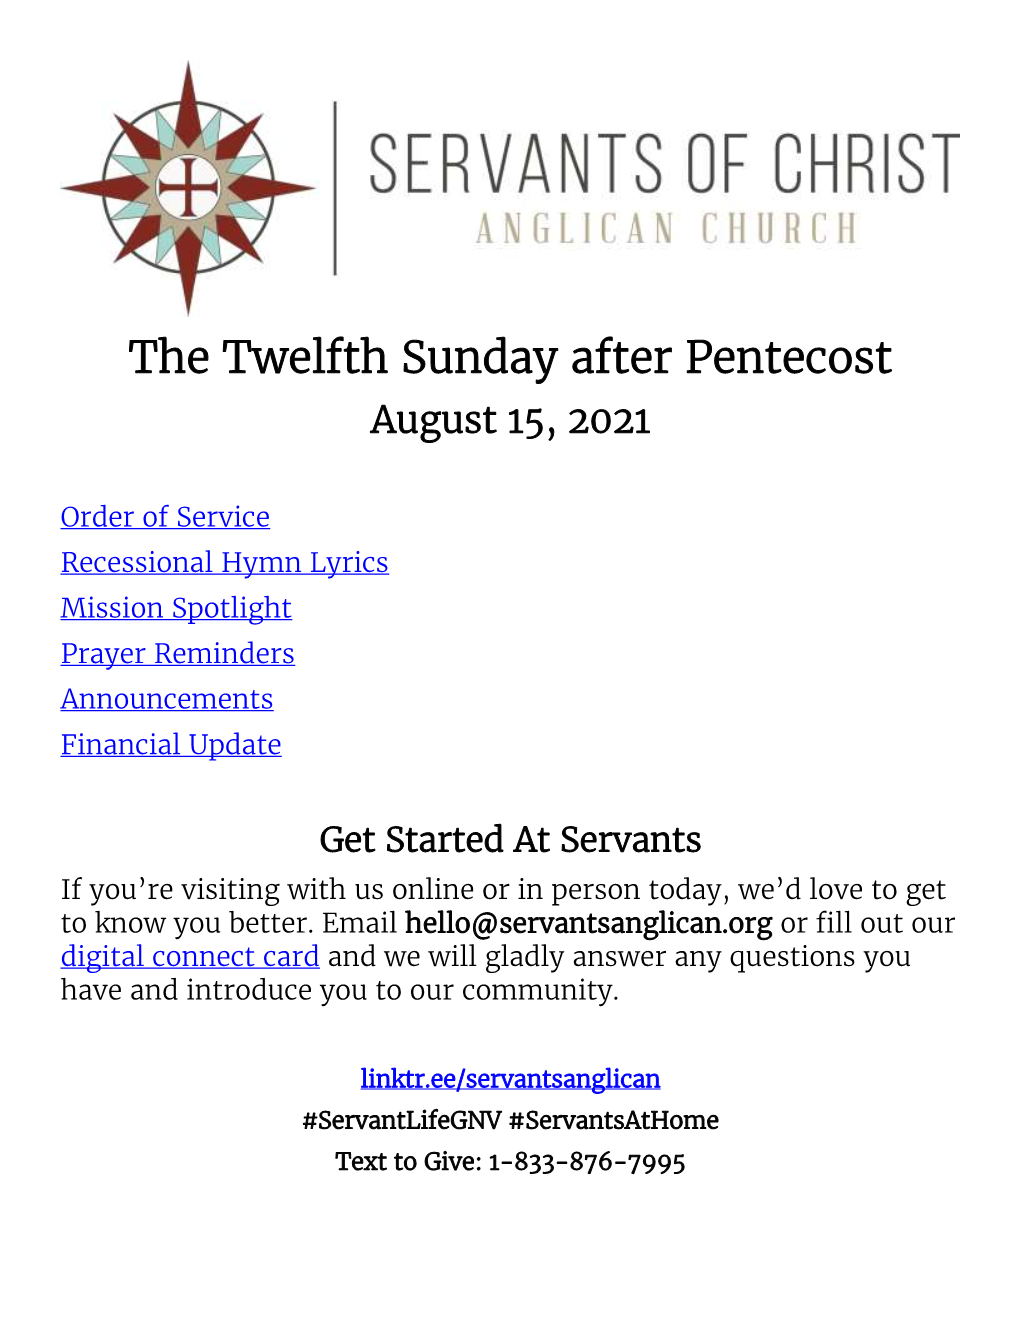 The Twelfth Sunday After Pentecost August 15, 2021